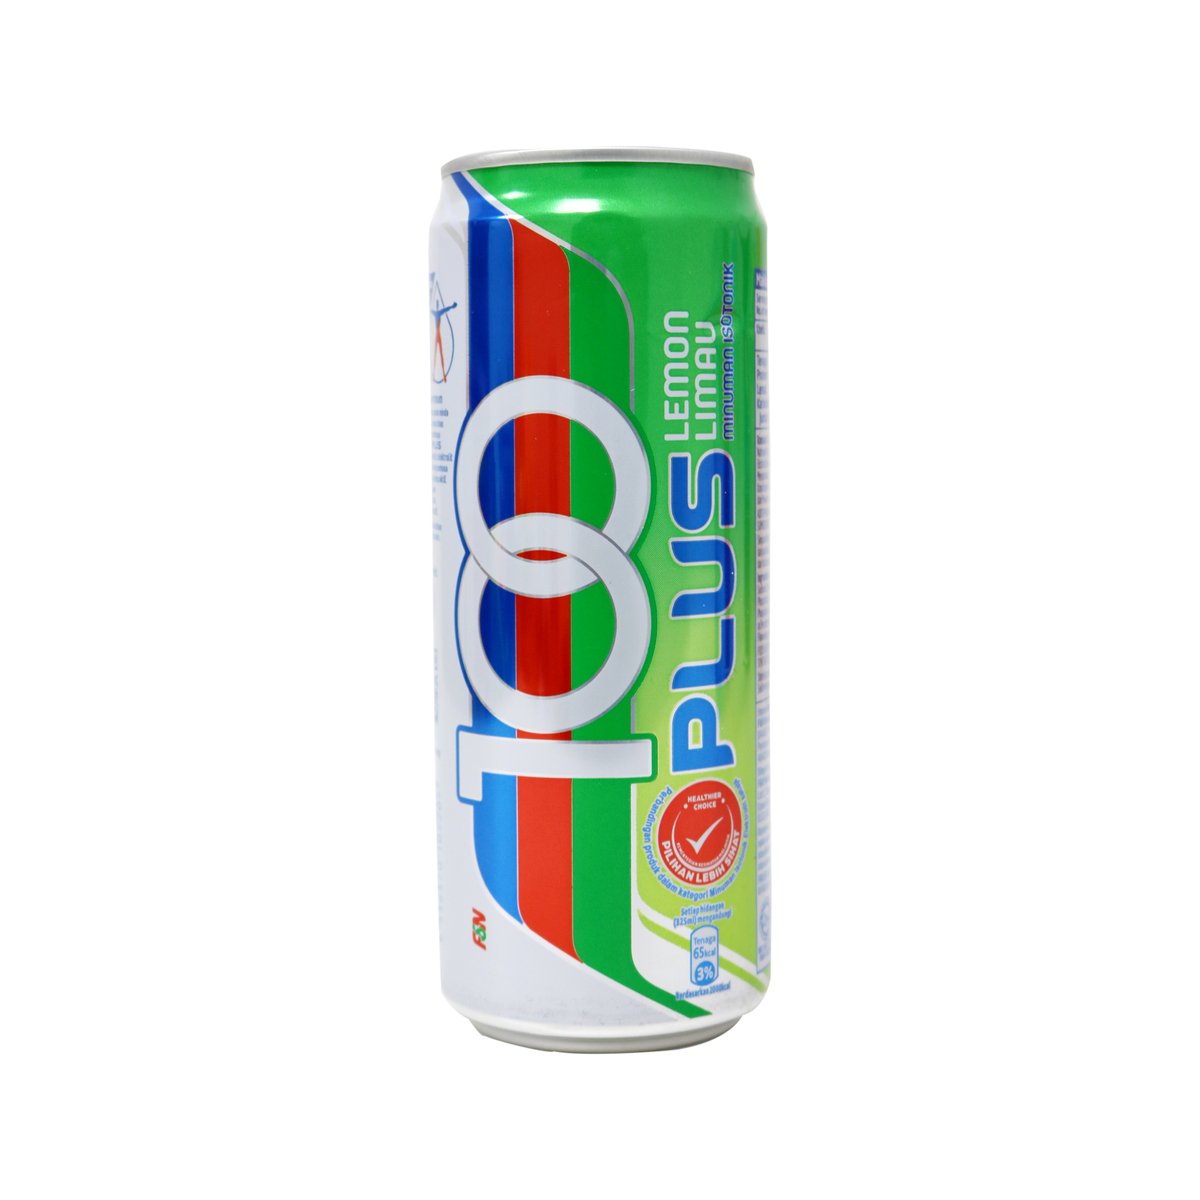 100 Plus Lime Can 325ml